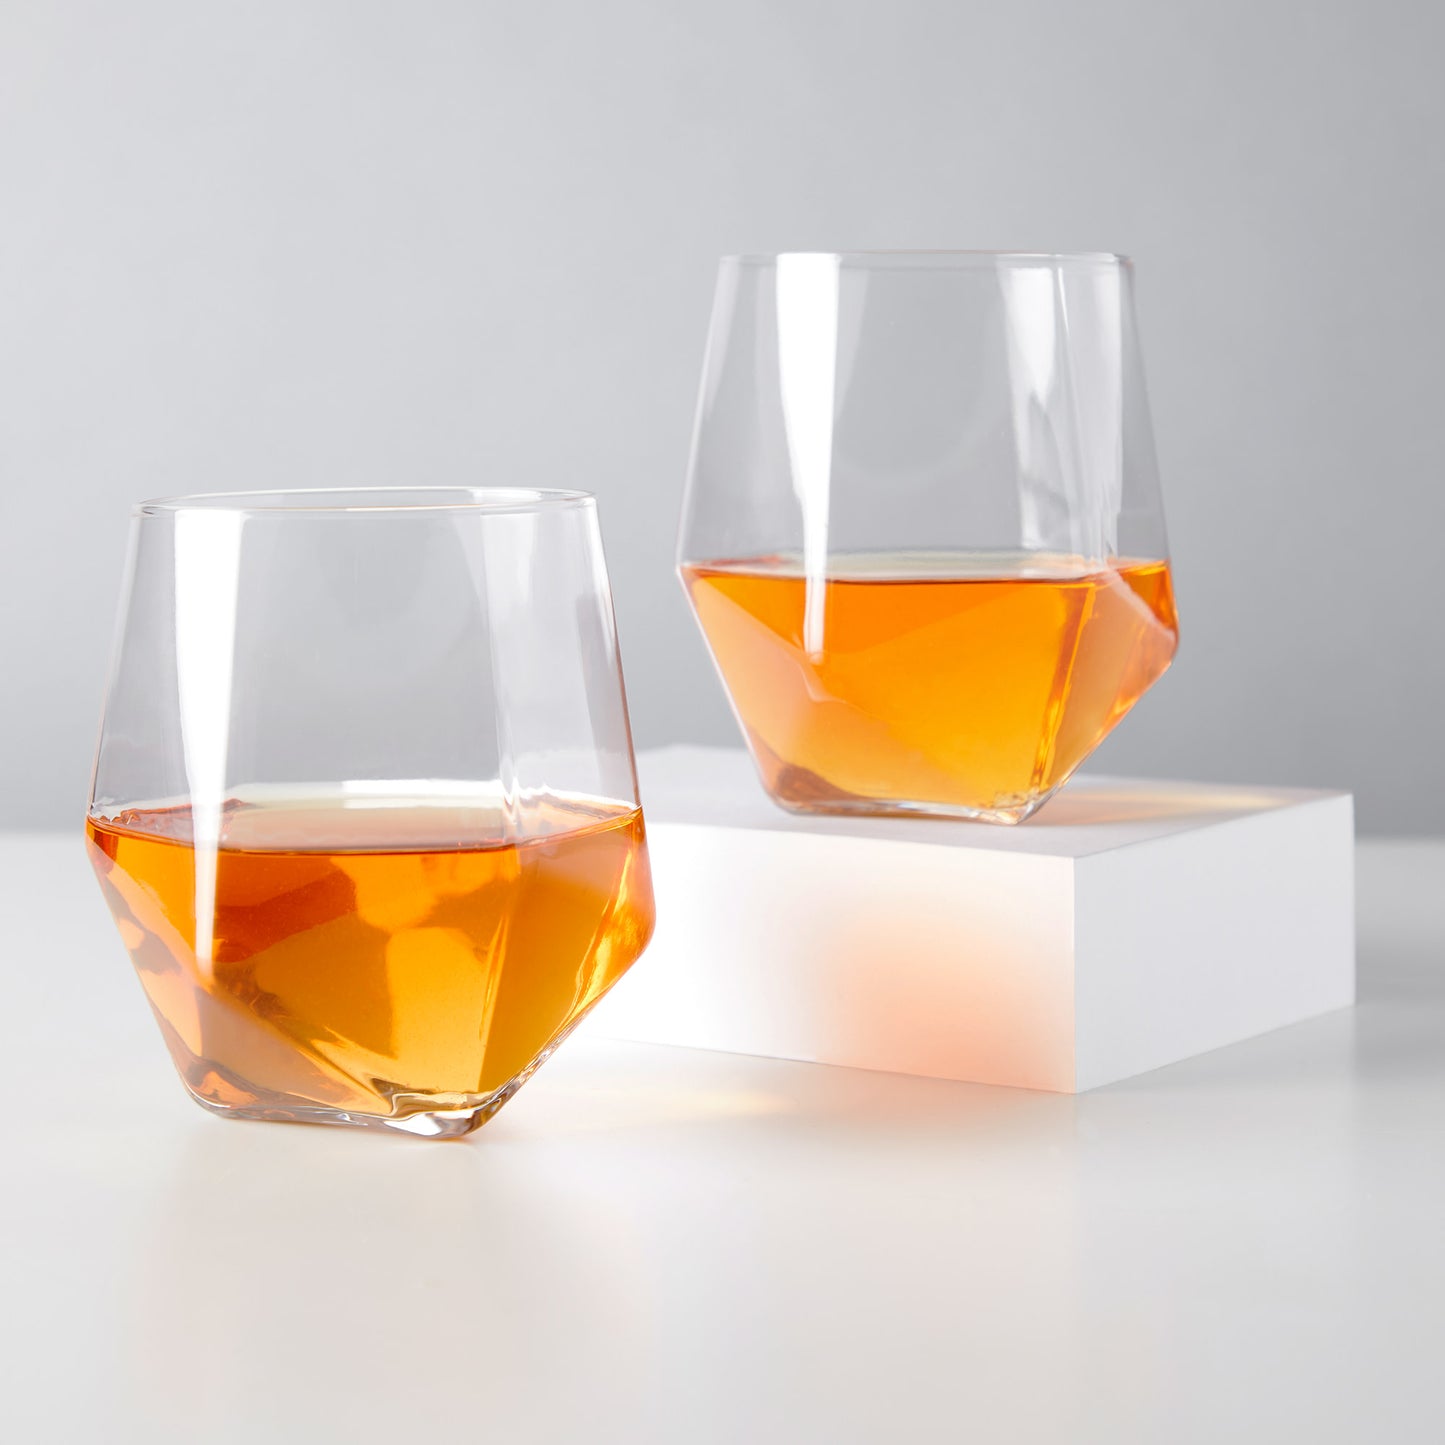 Faceted Crystal Tumblers